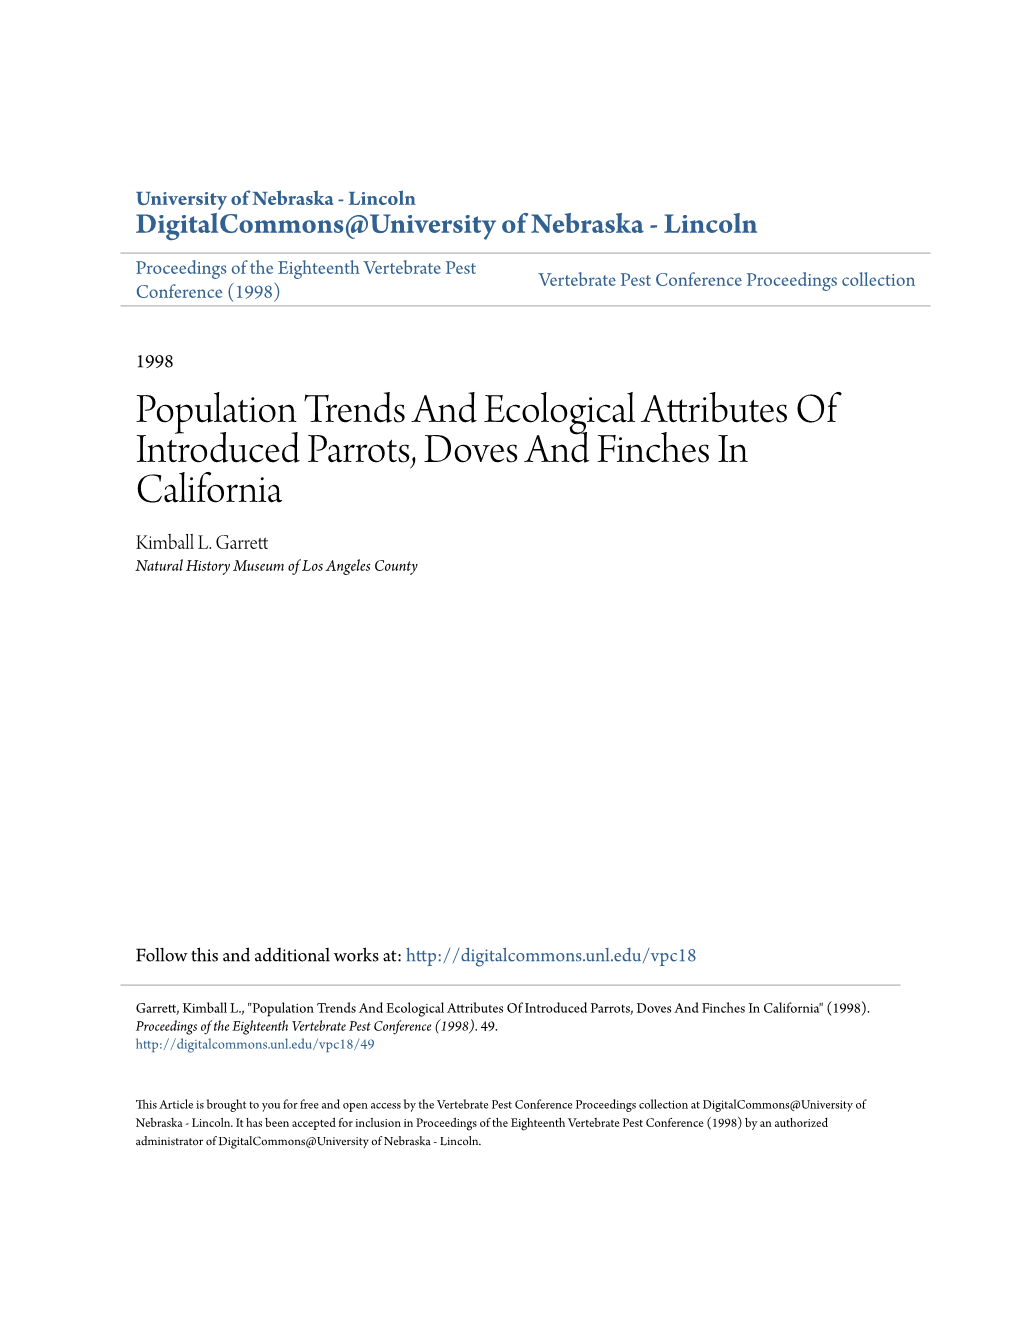 Population Trends and Ecological Attributes of Introduced Parrots, Doves and Finches in California Kimball L